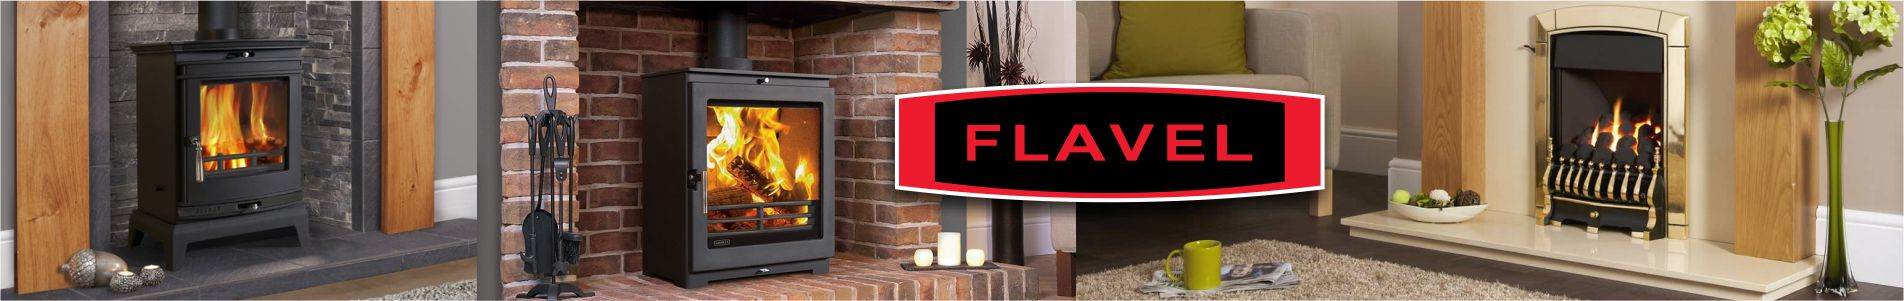 Flavel Fires